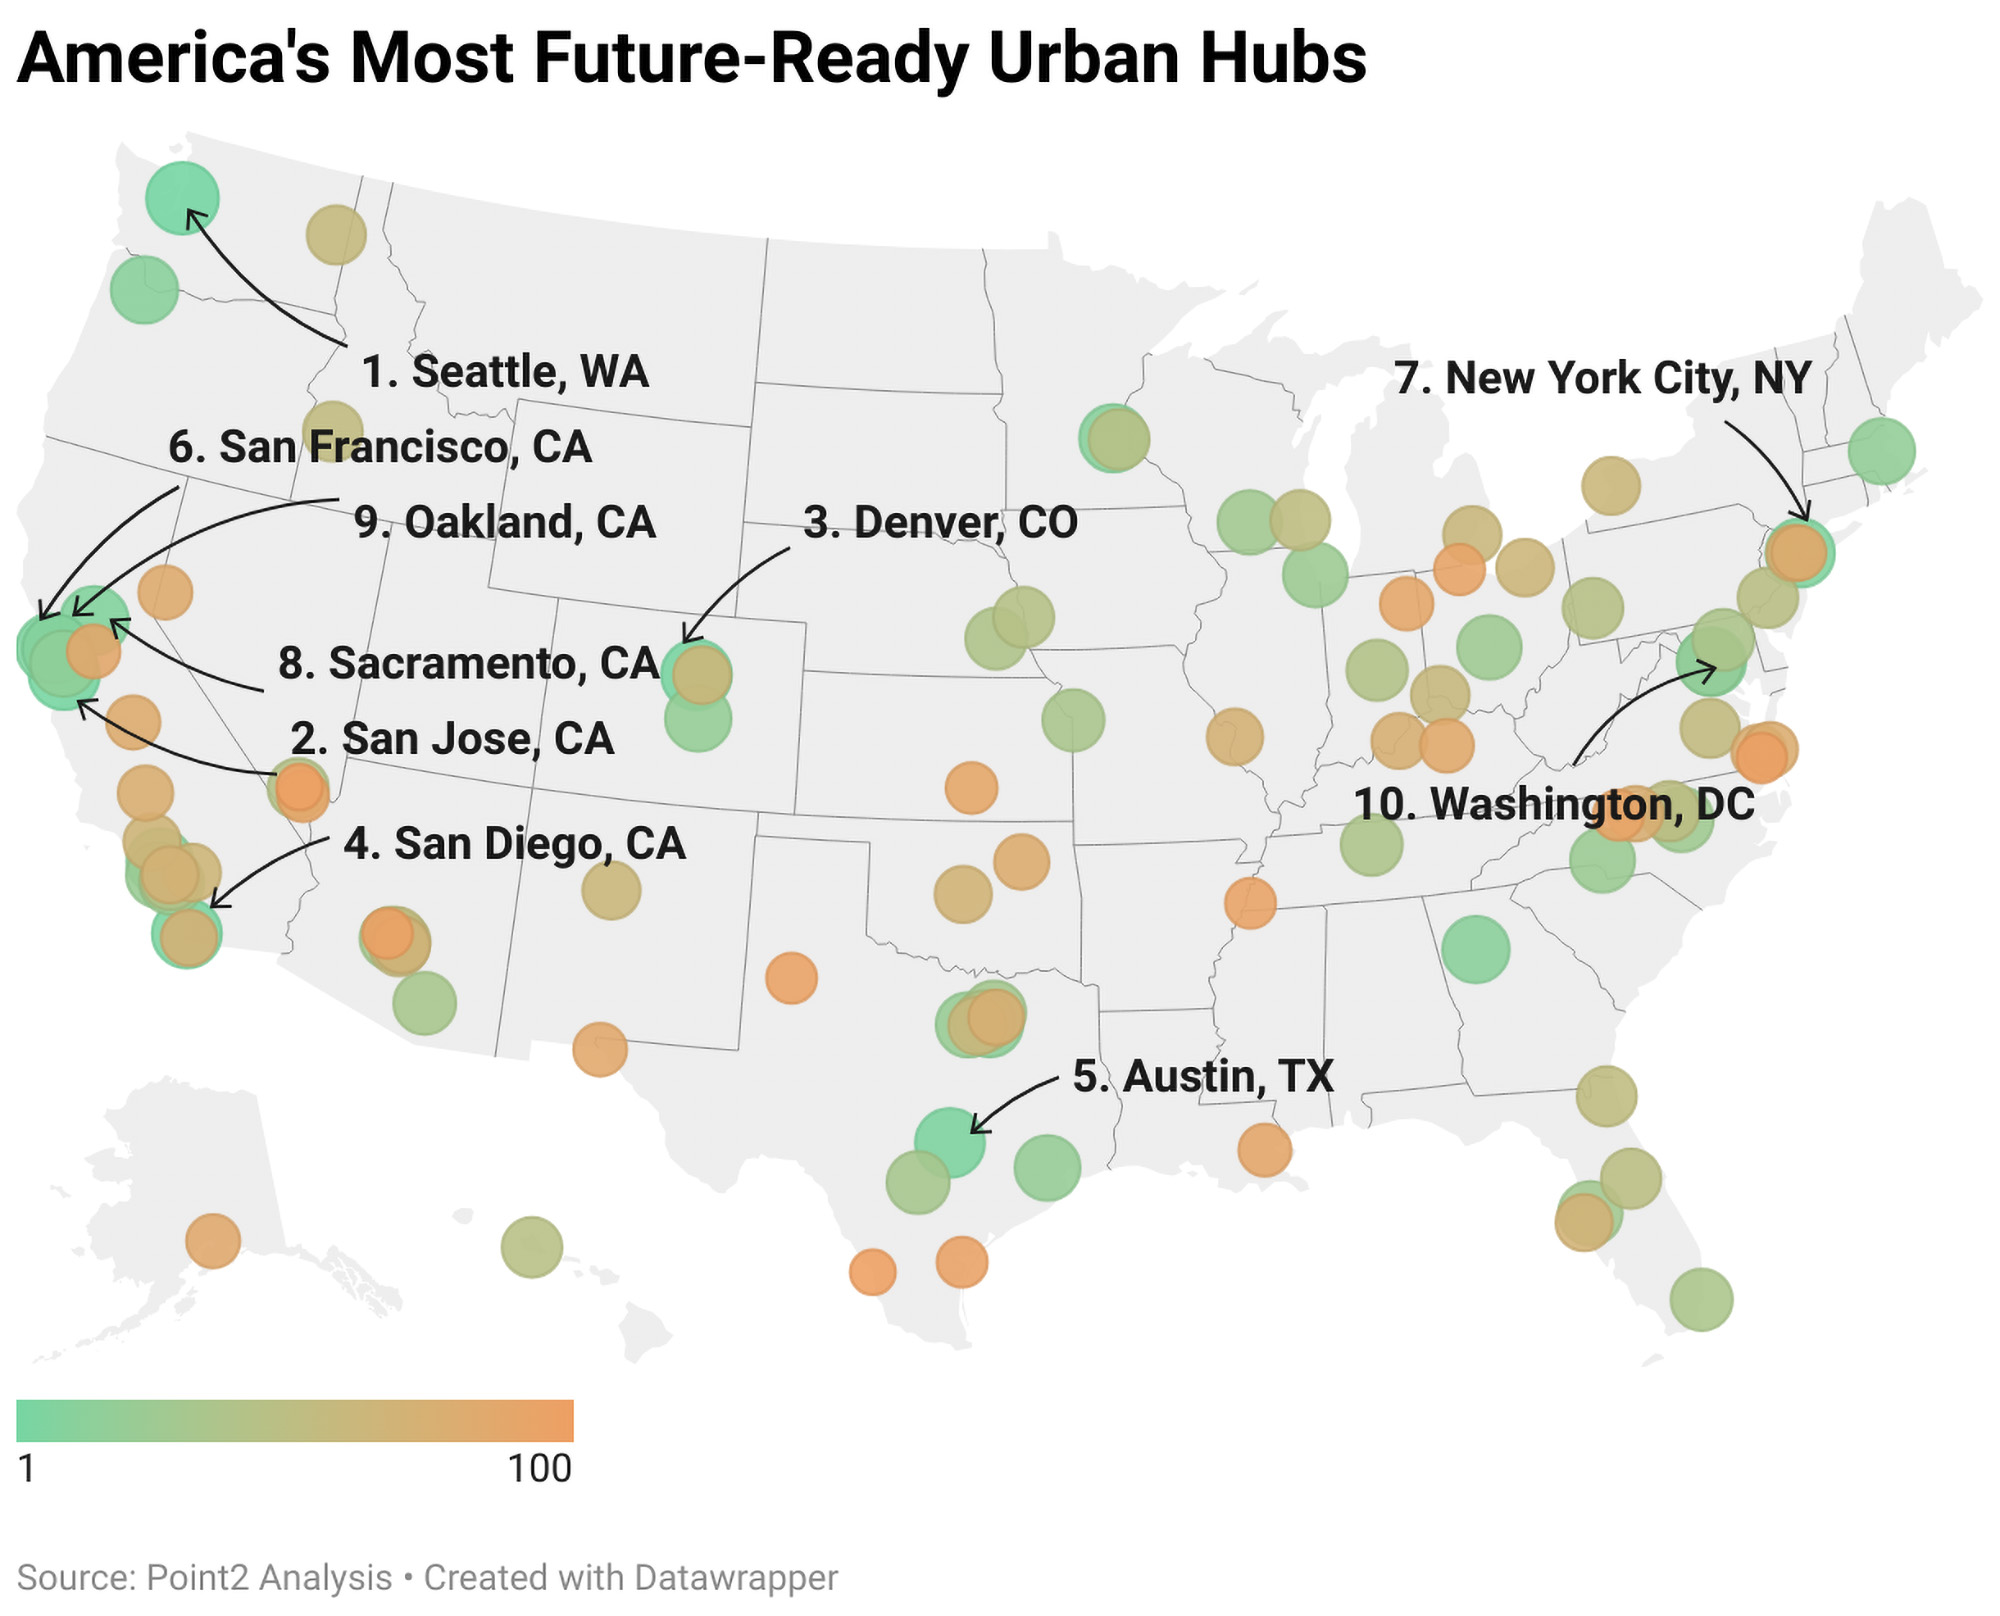 Top 10 'future-ready' cities